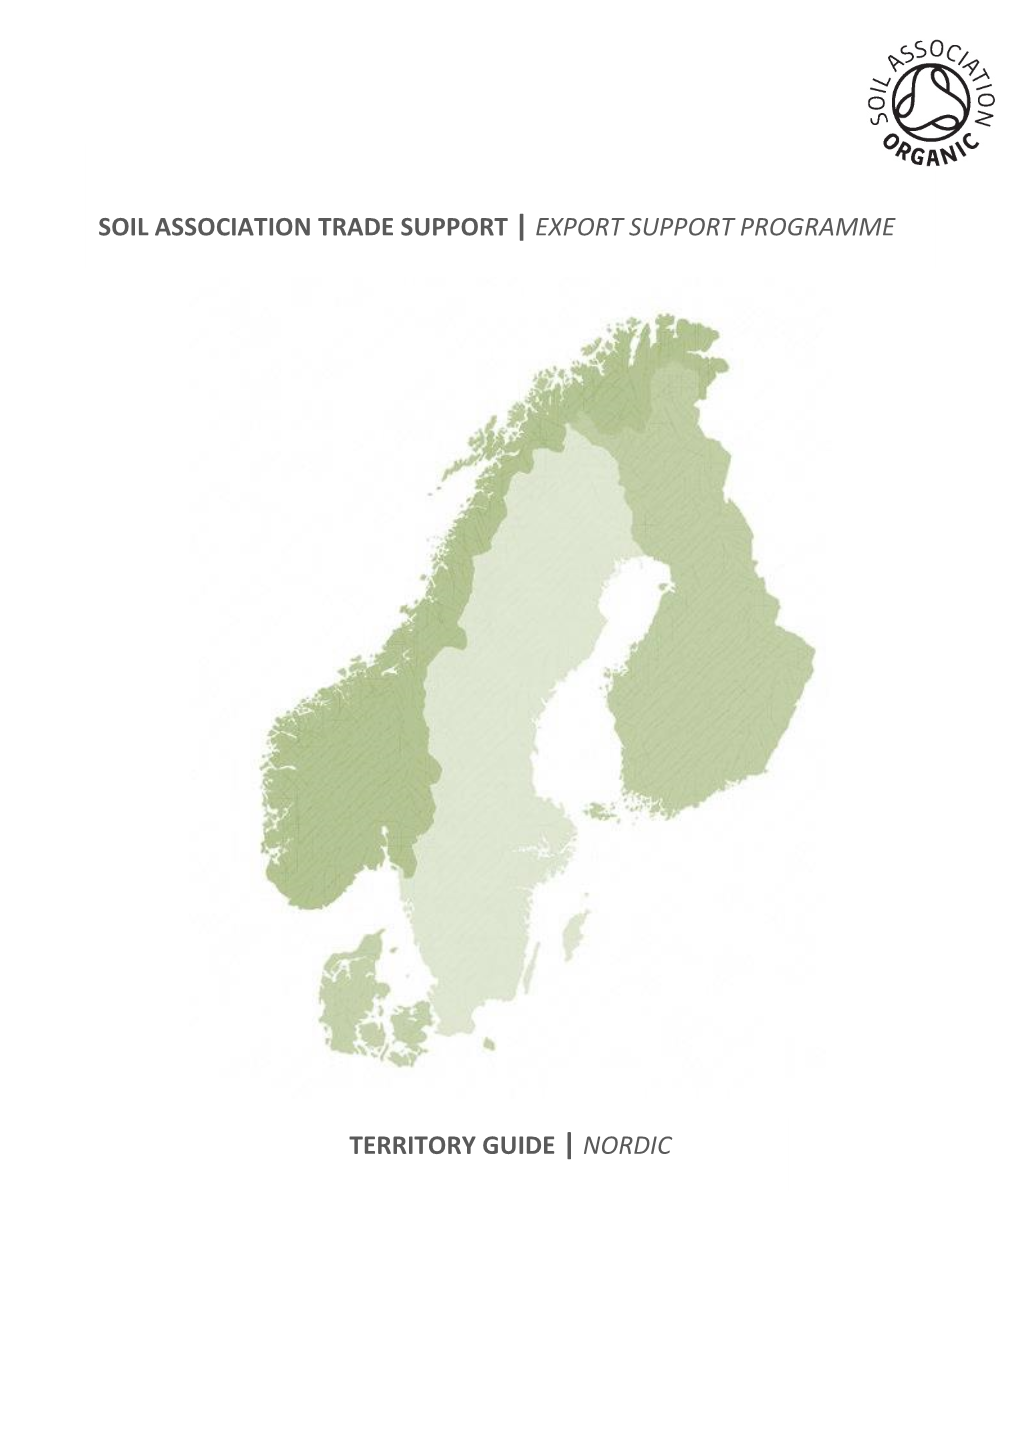 Territory Guide | Nordic Soil Association Trade Support